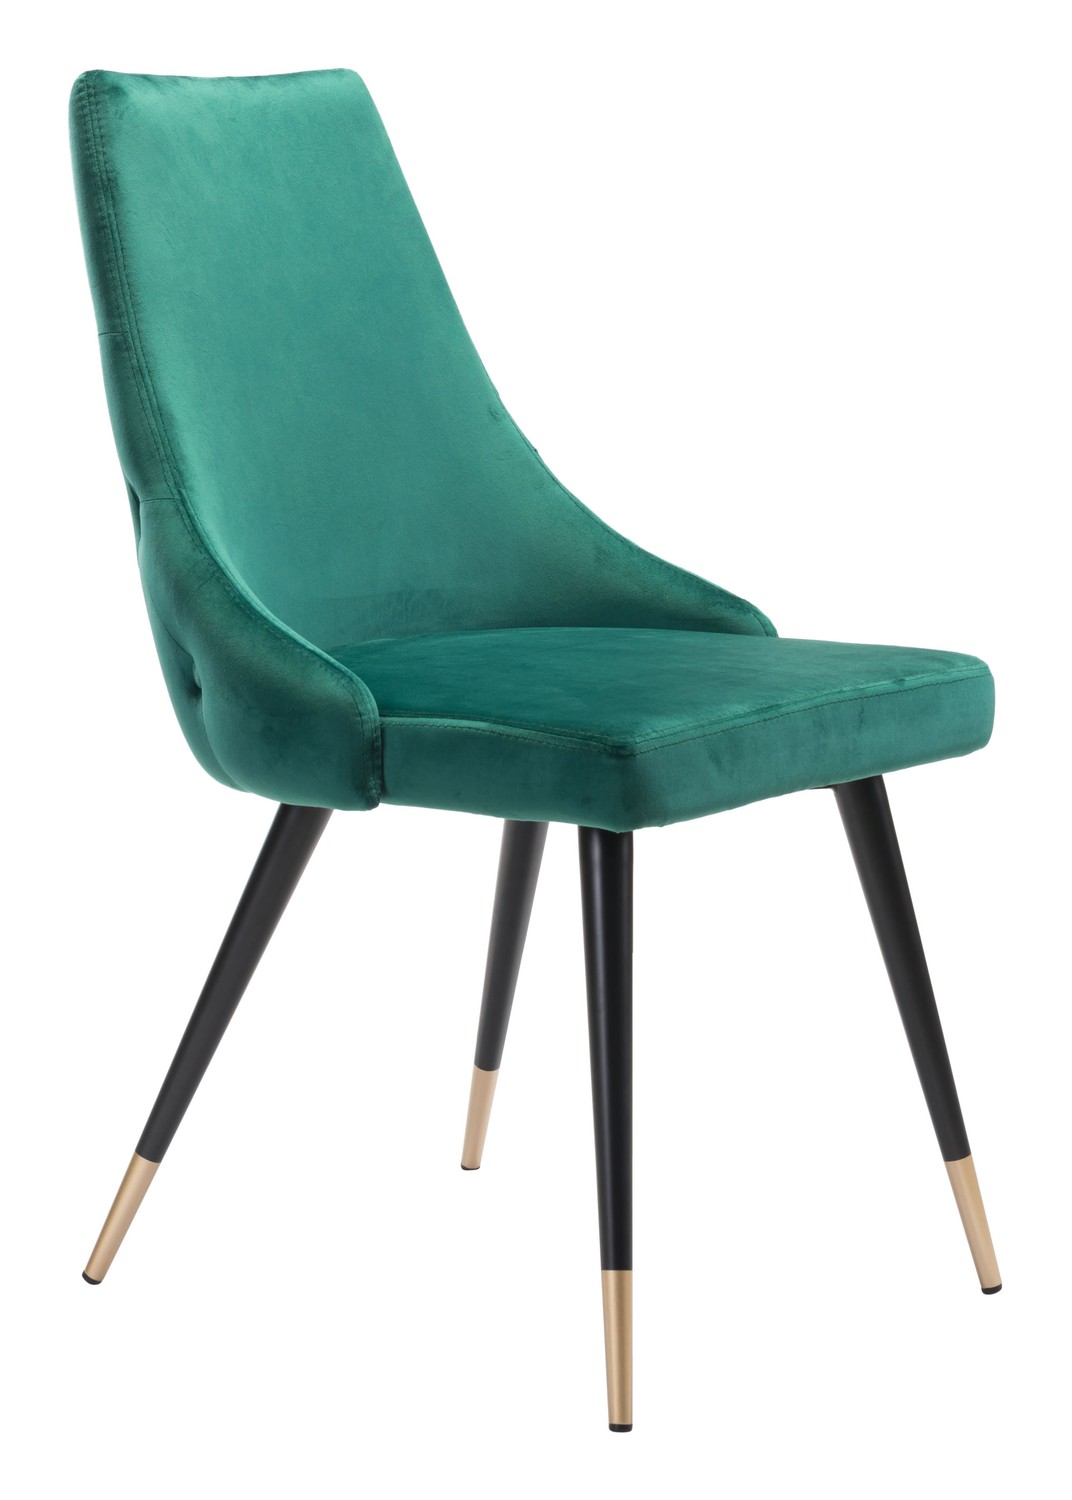 Fashionable Emerald Green Velvet Dining or Side Chair - Set of 2